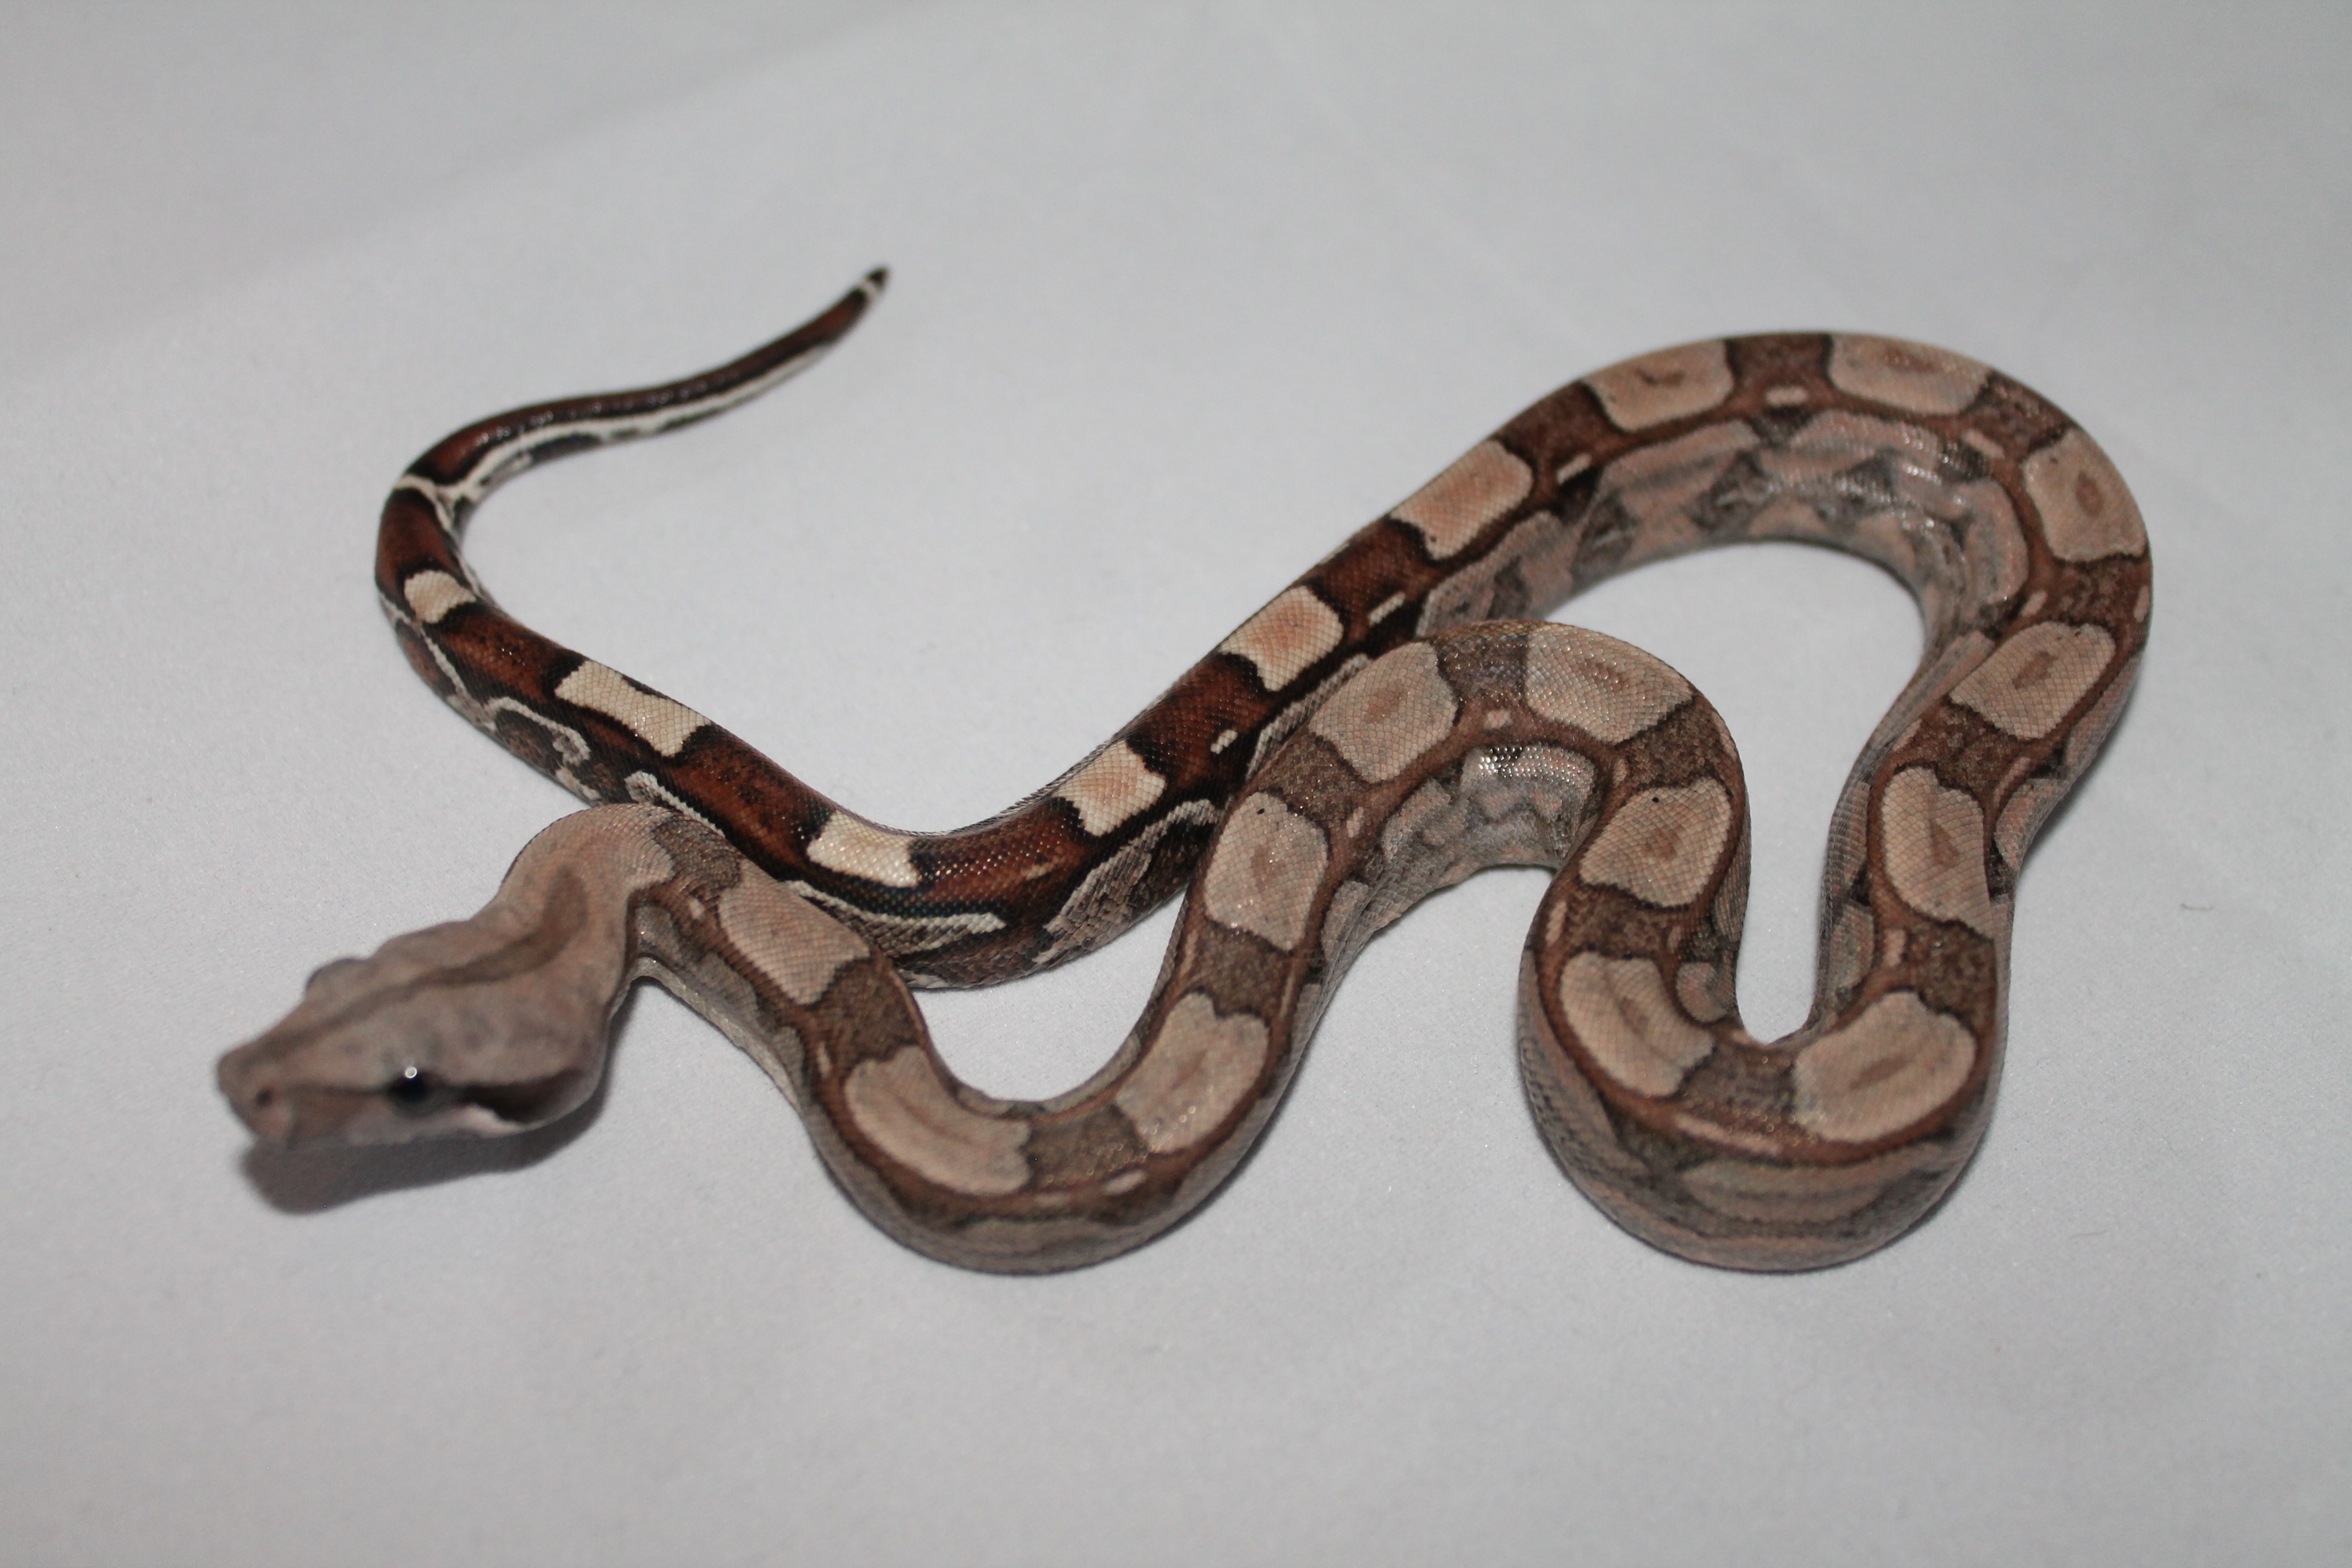 Key West Boa Constrictor by 1st Choice Boas